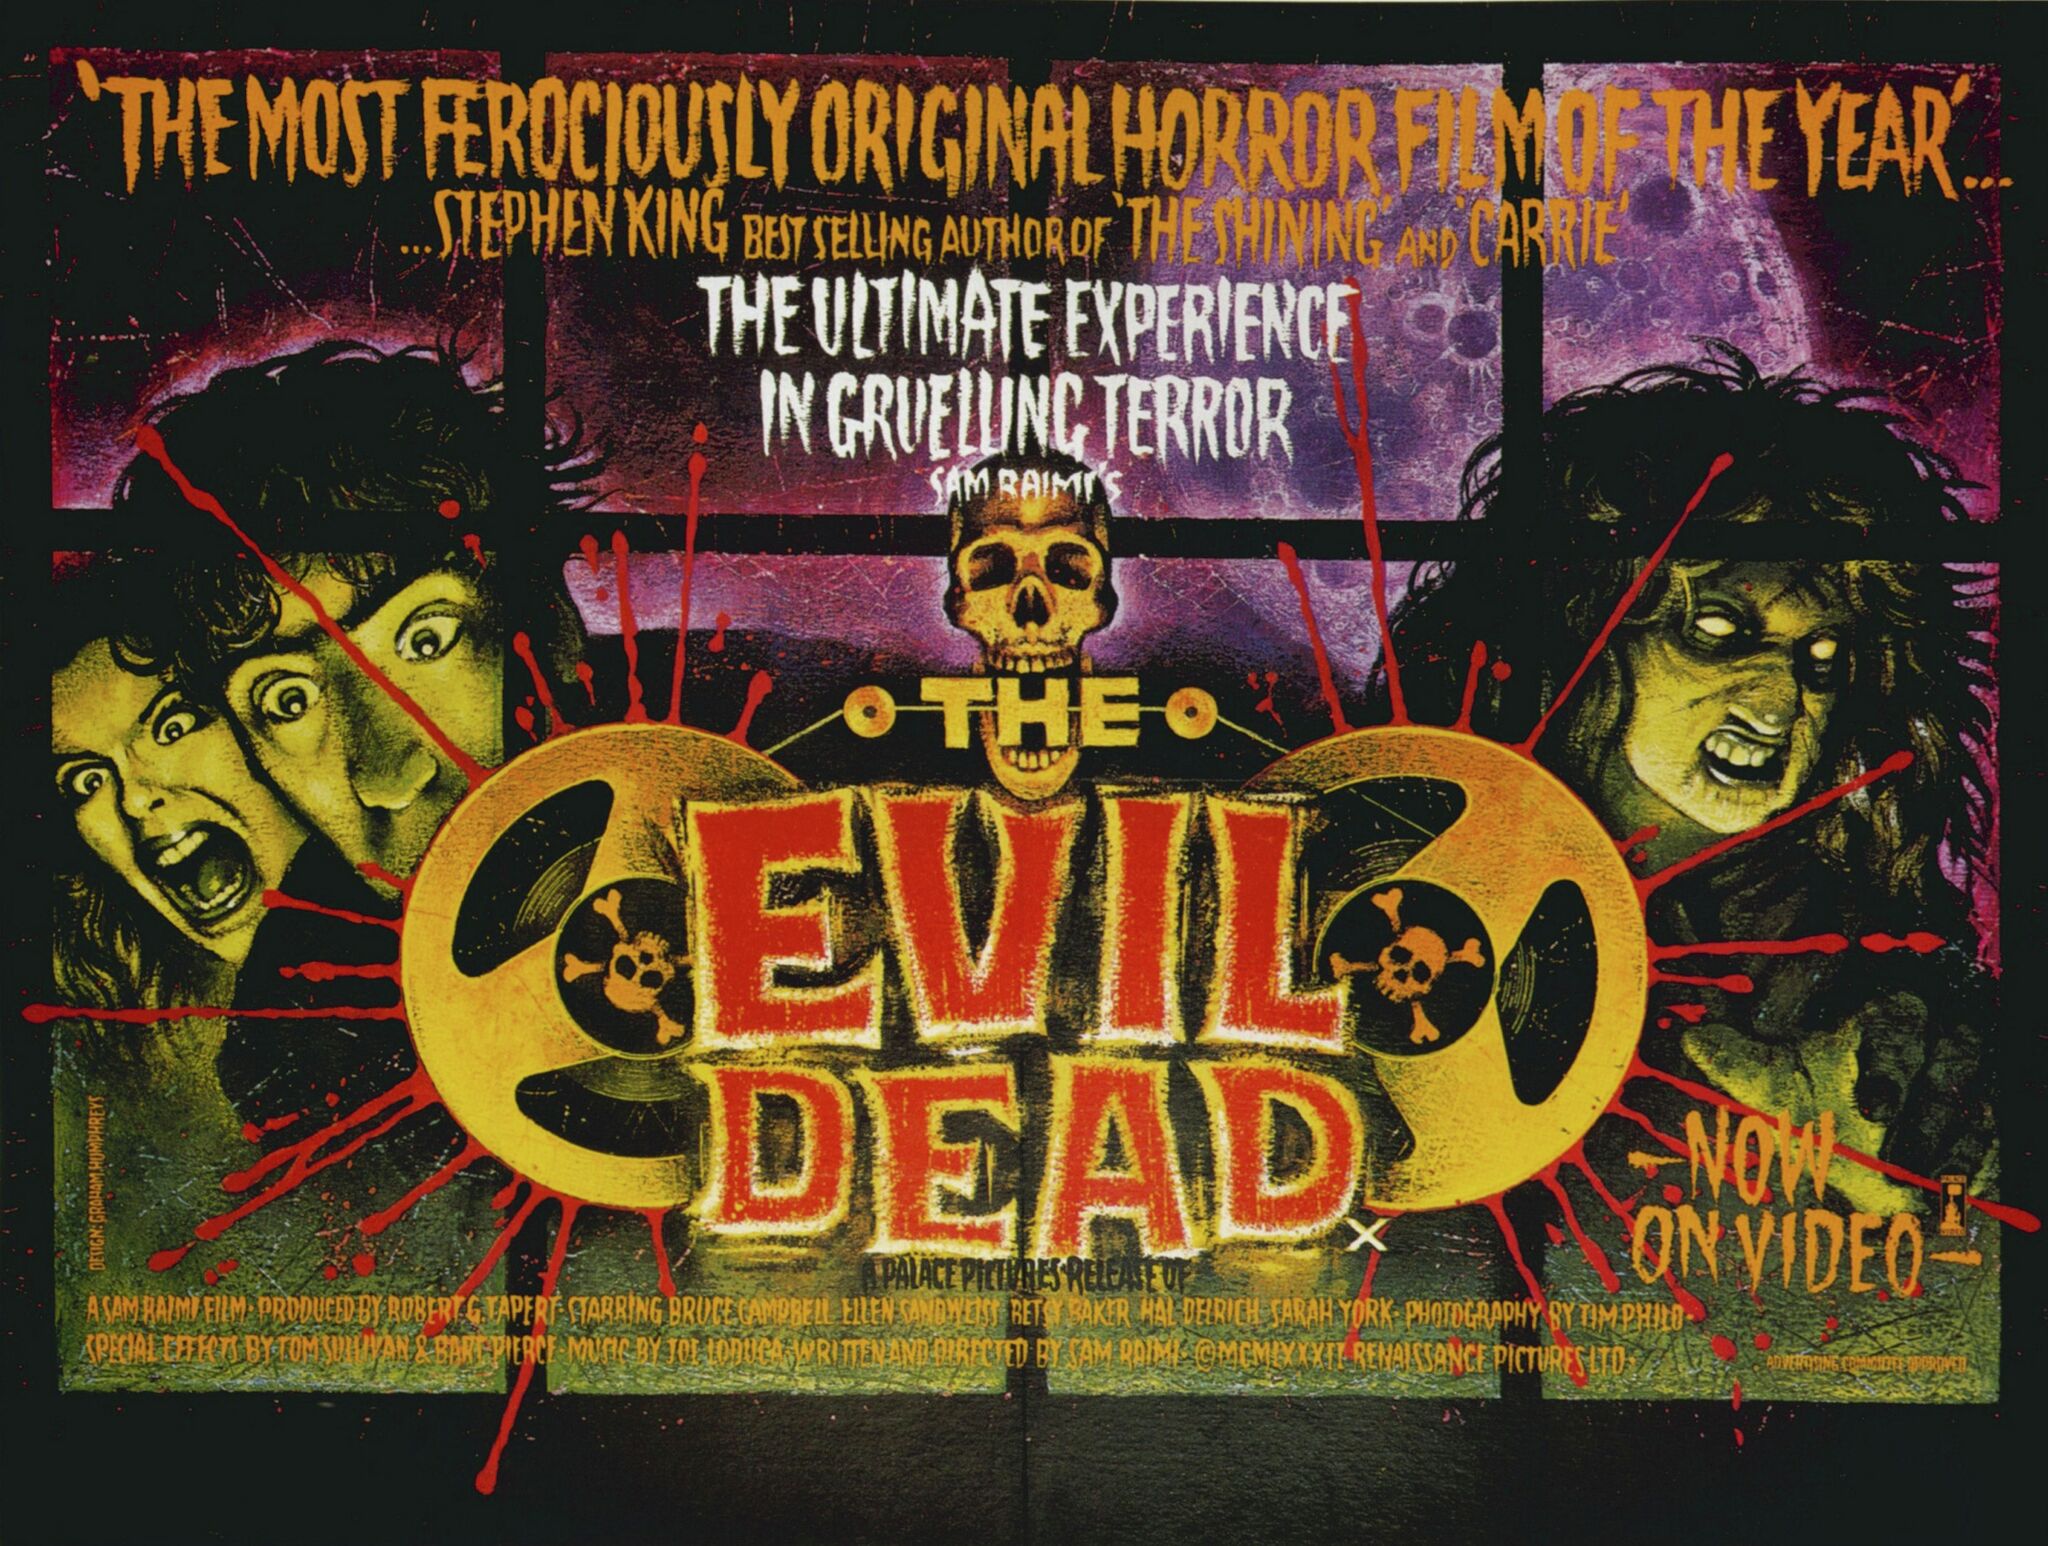 The Evil Dead (1981) - Movie - Where To Watch